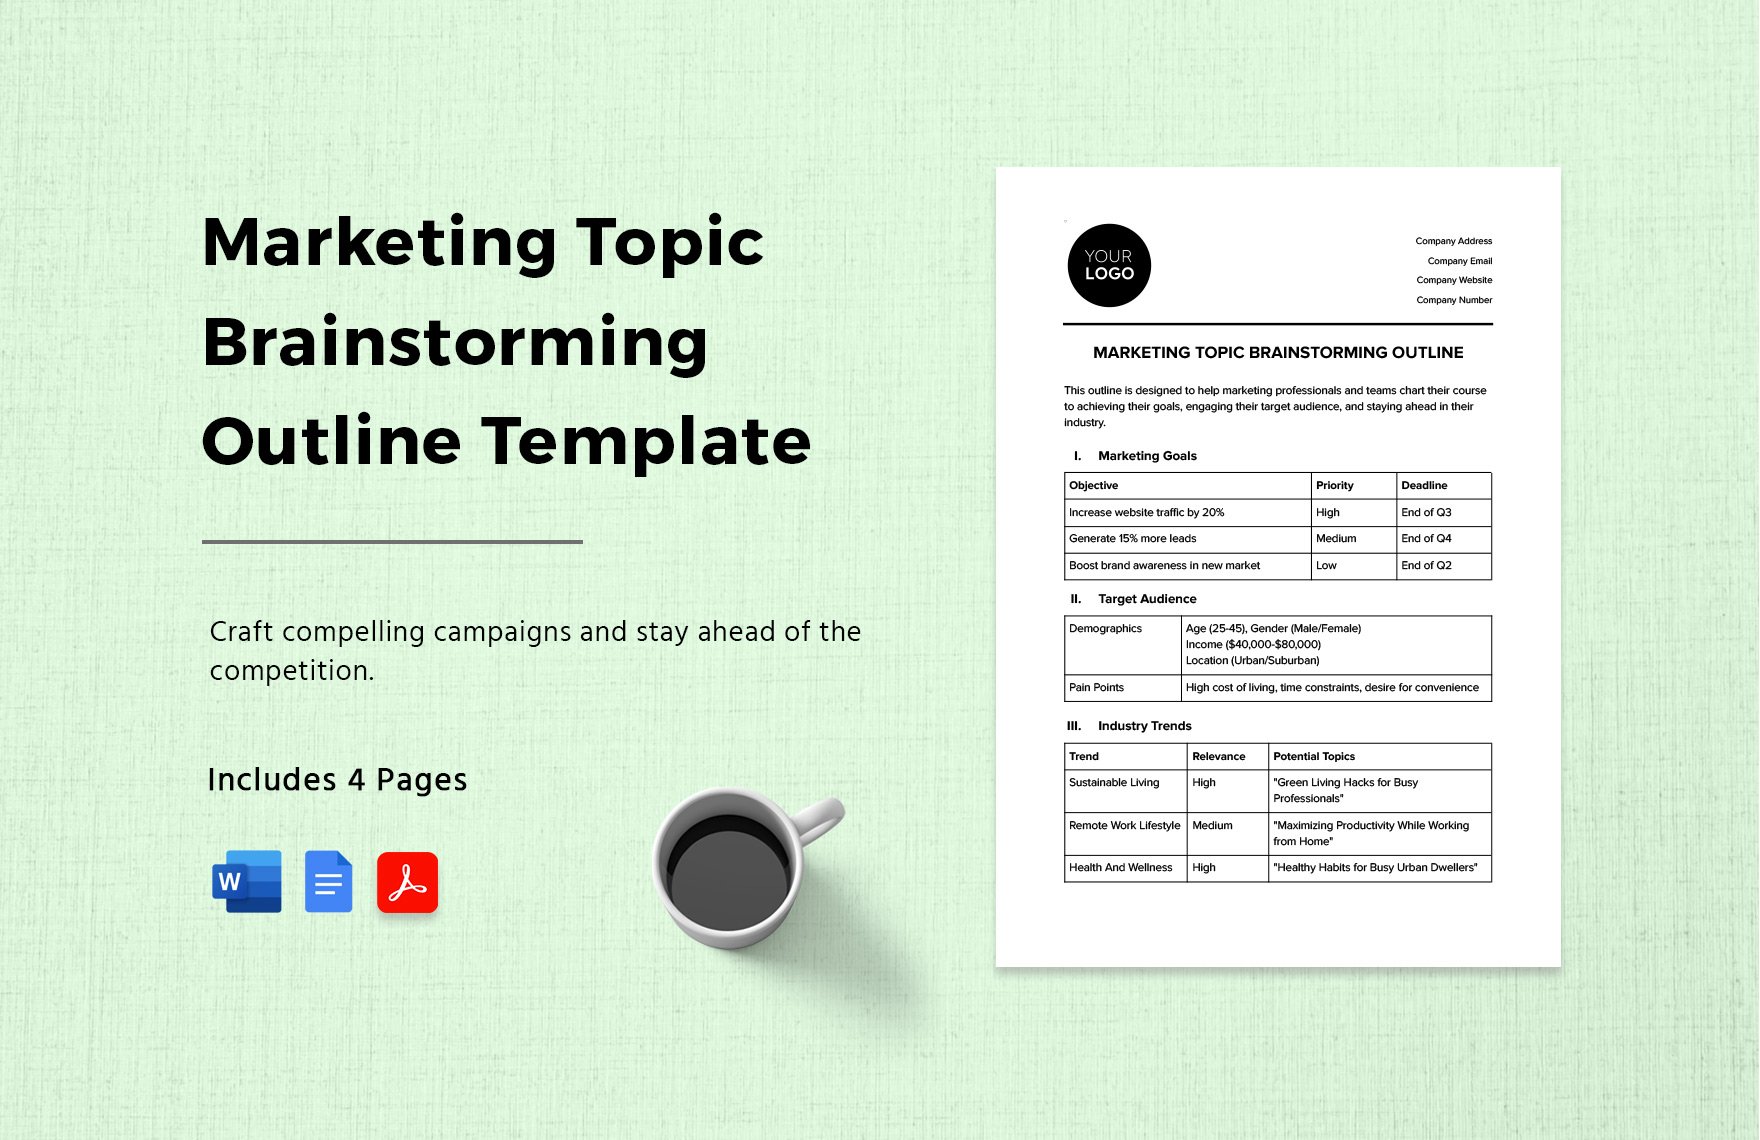 Marketing Topic Brainstorming Outline Template in Word, Google Docs, PDF